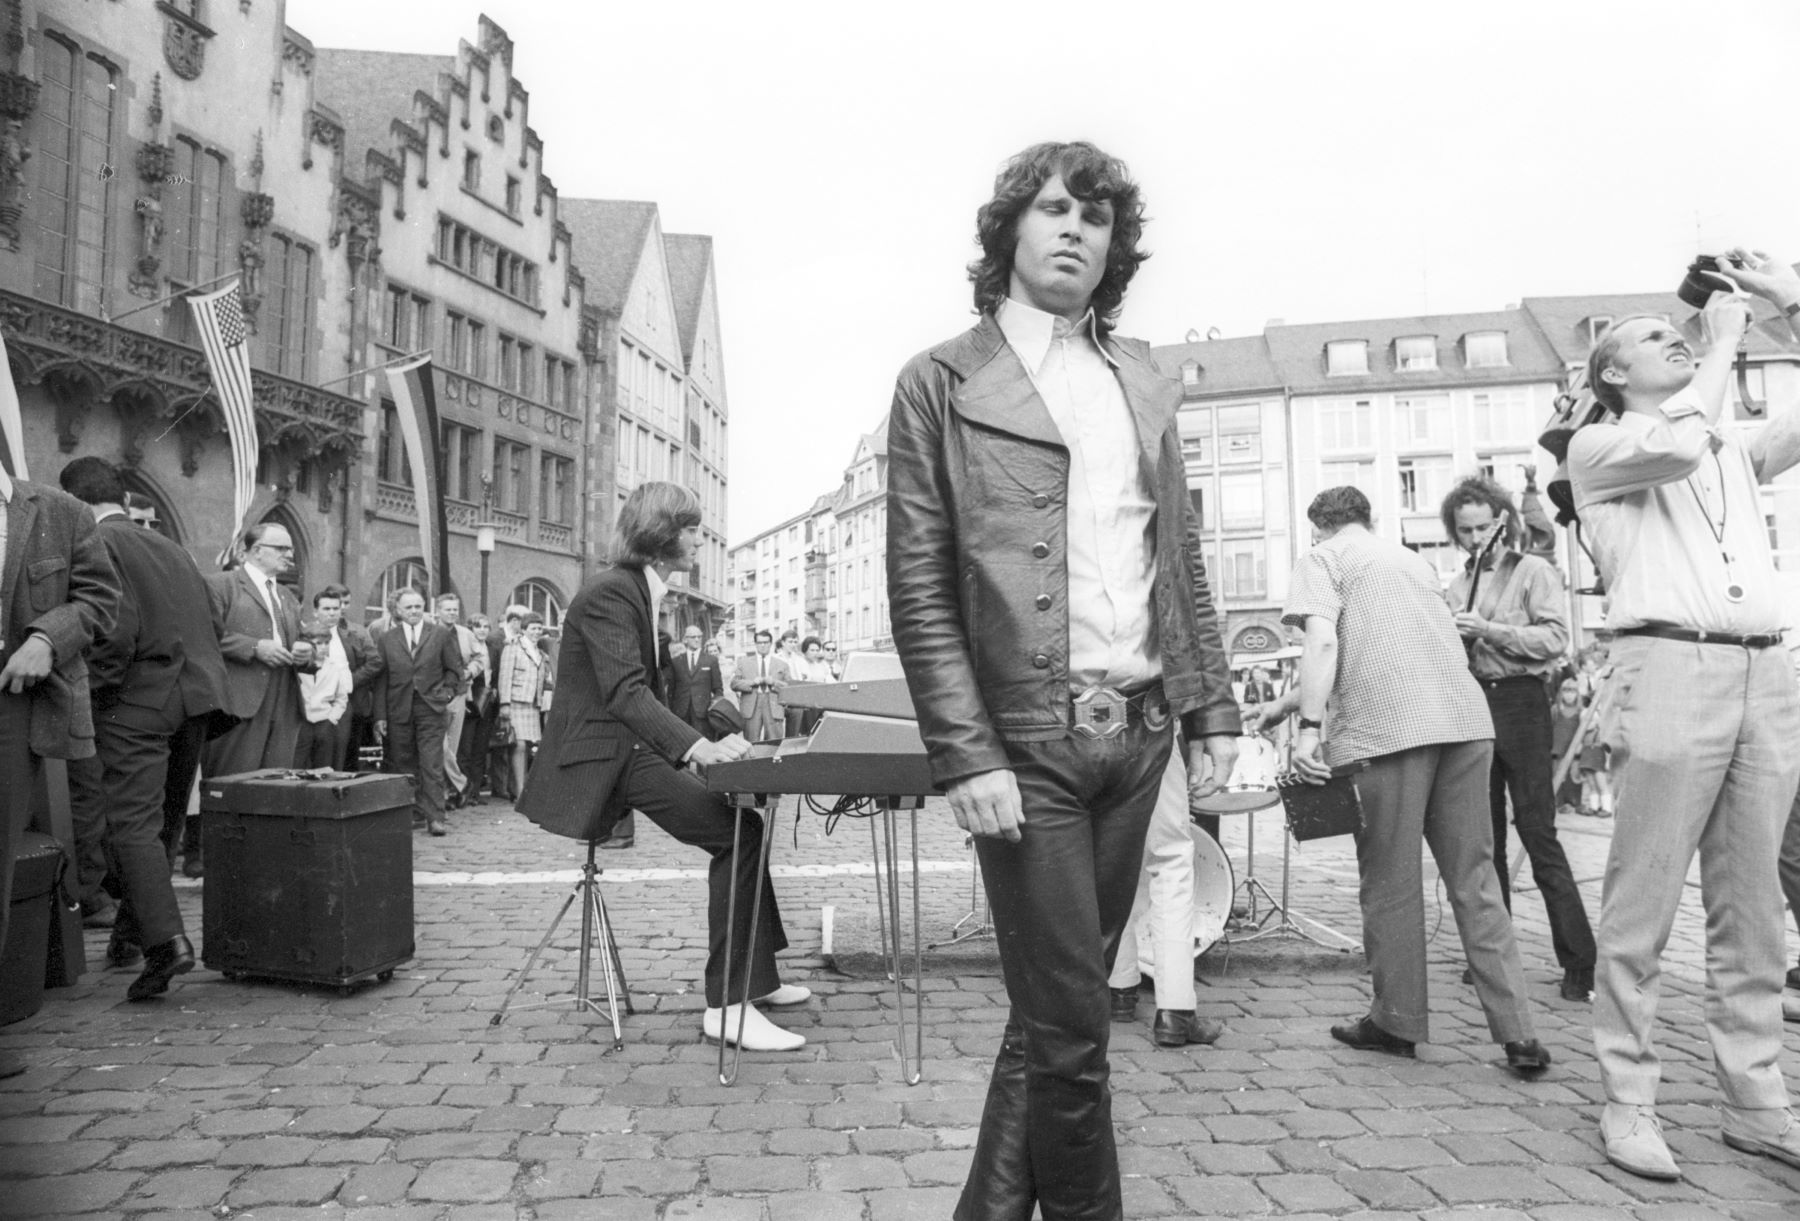 Jim Morrison with The Doors in 1970